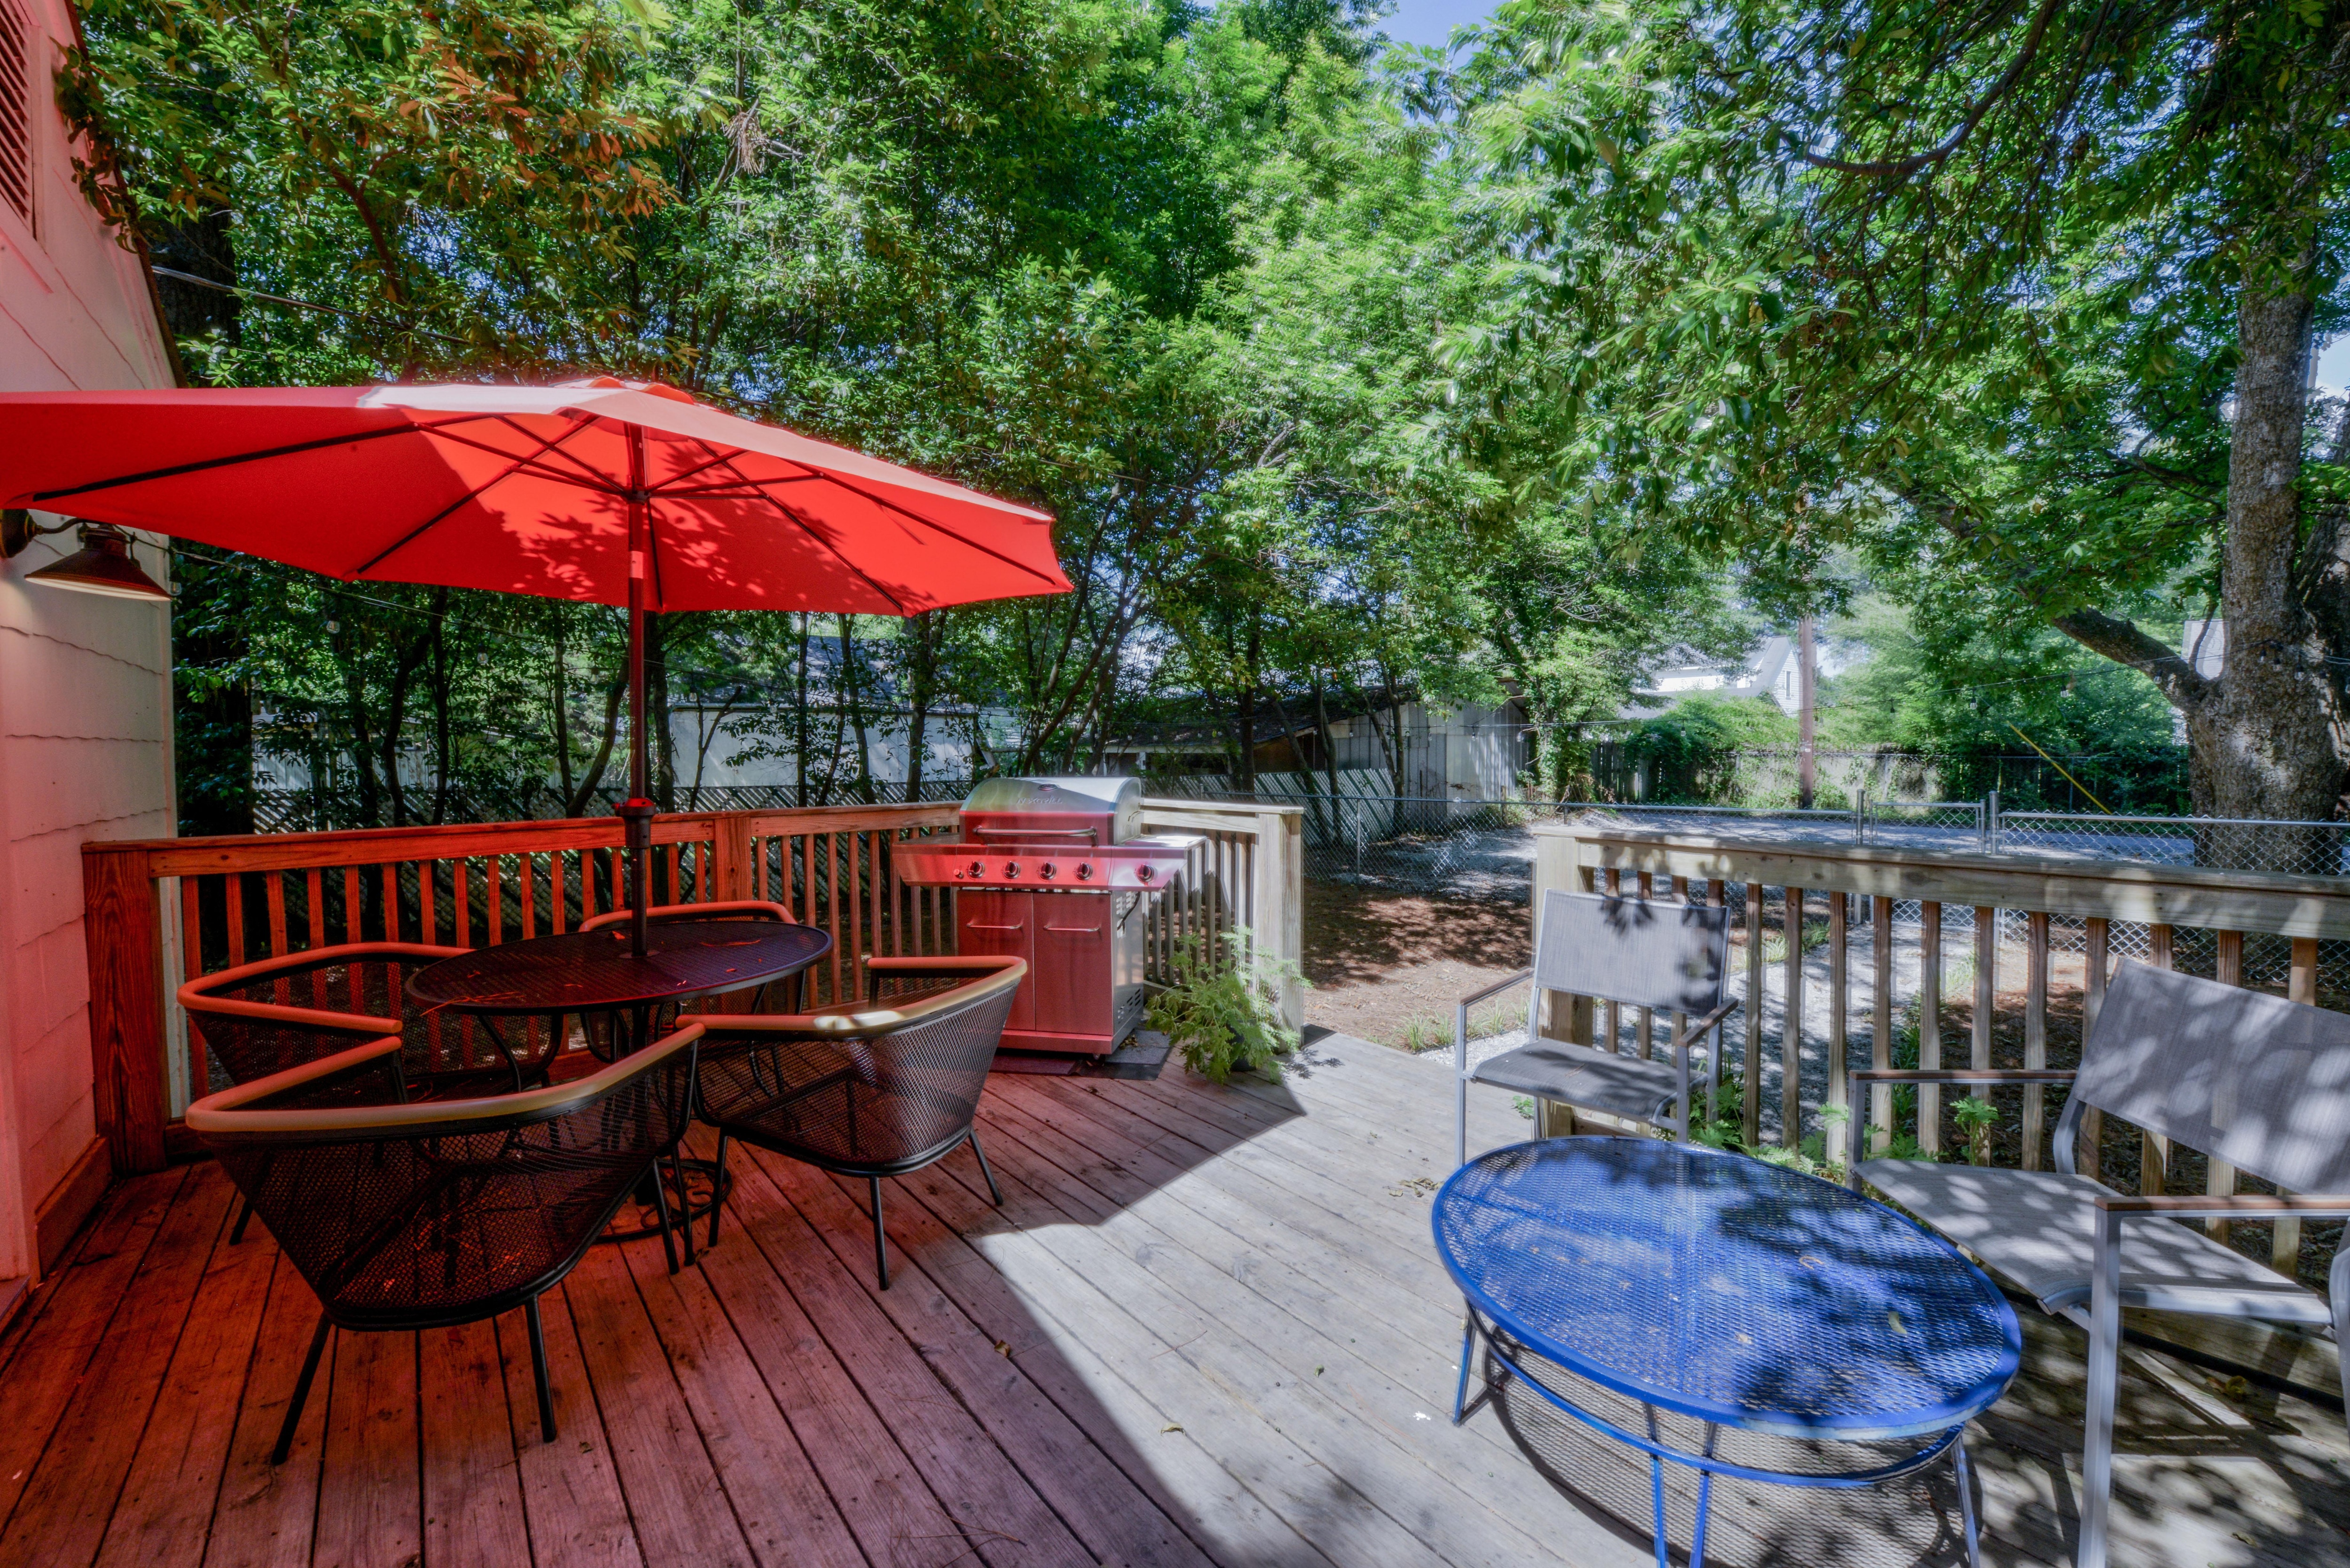 Enjoy grilling and eating outside on the back porch.